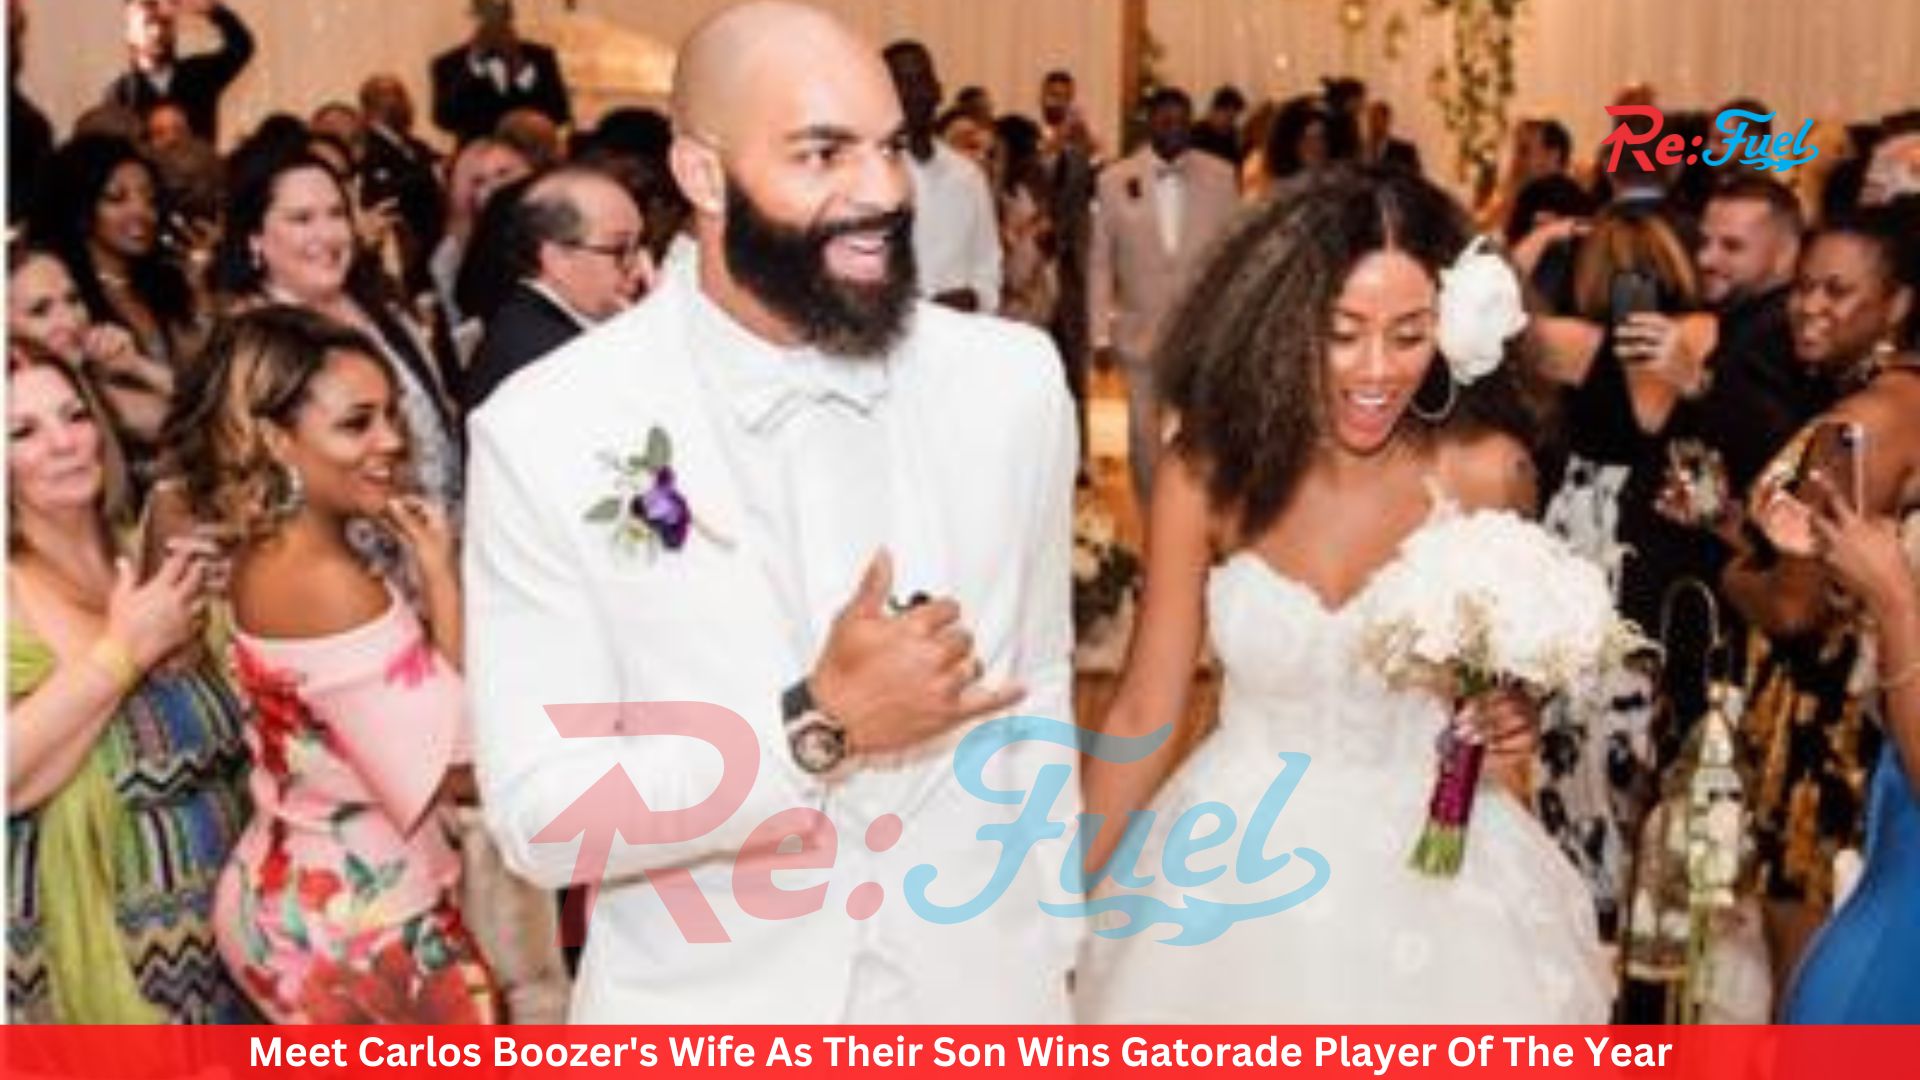 Meet Carlos Boozer's Wife As Their Son Wins Gatorade Player Of The Year